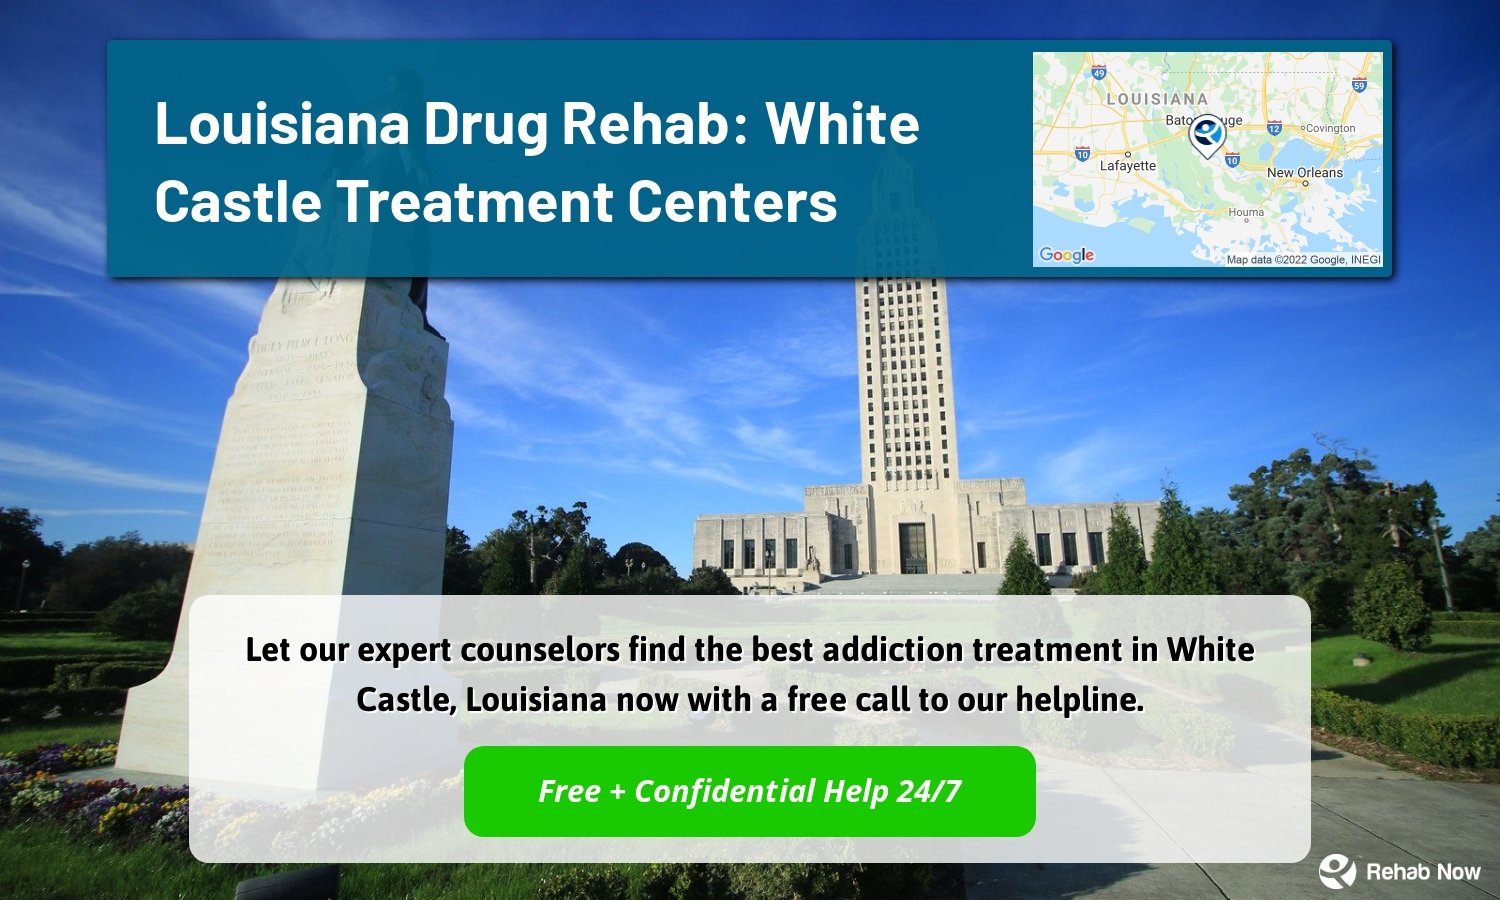 Let our expert counselors find the best addiction treatment in White Castle, Louisiana now with a free call to our helpline.